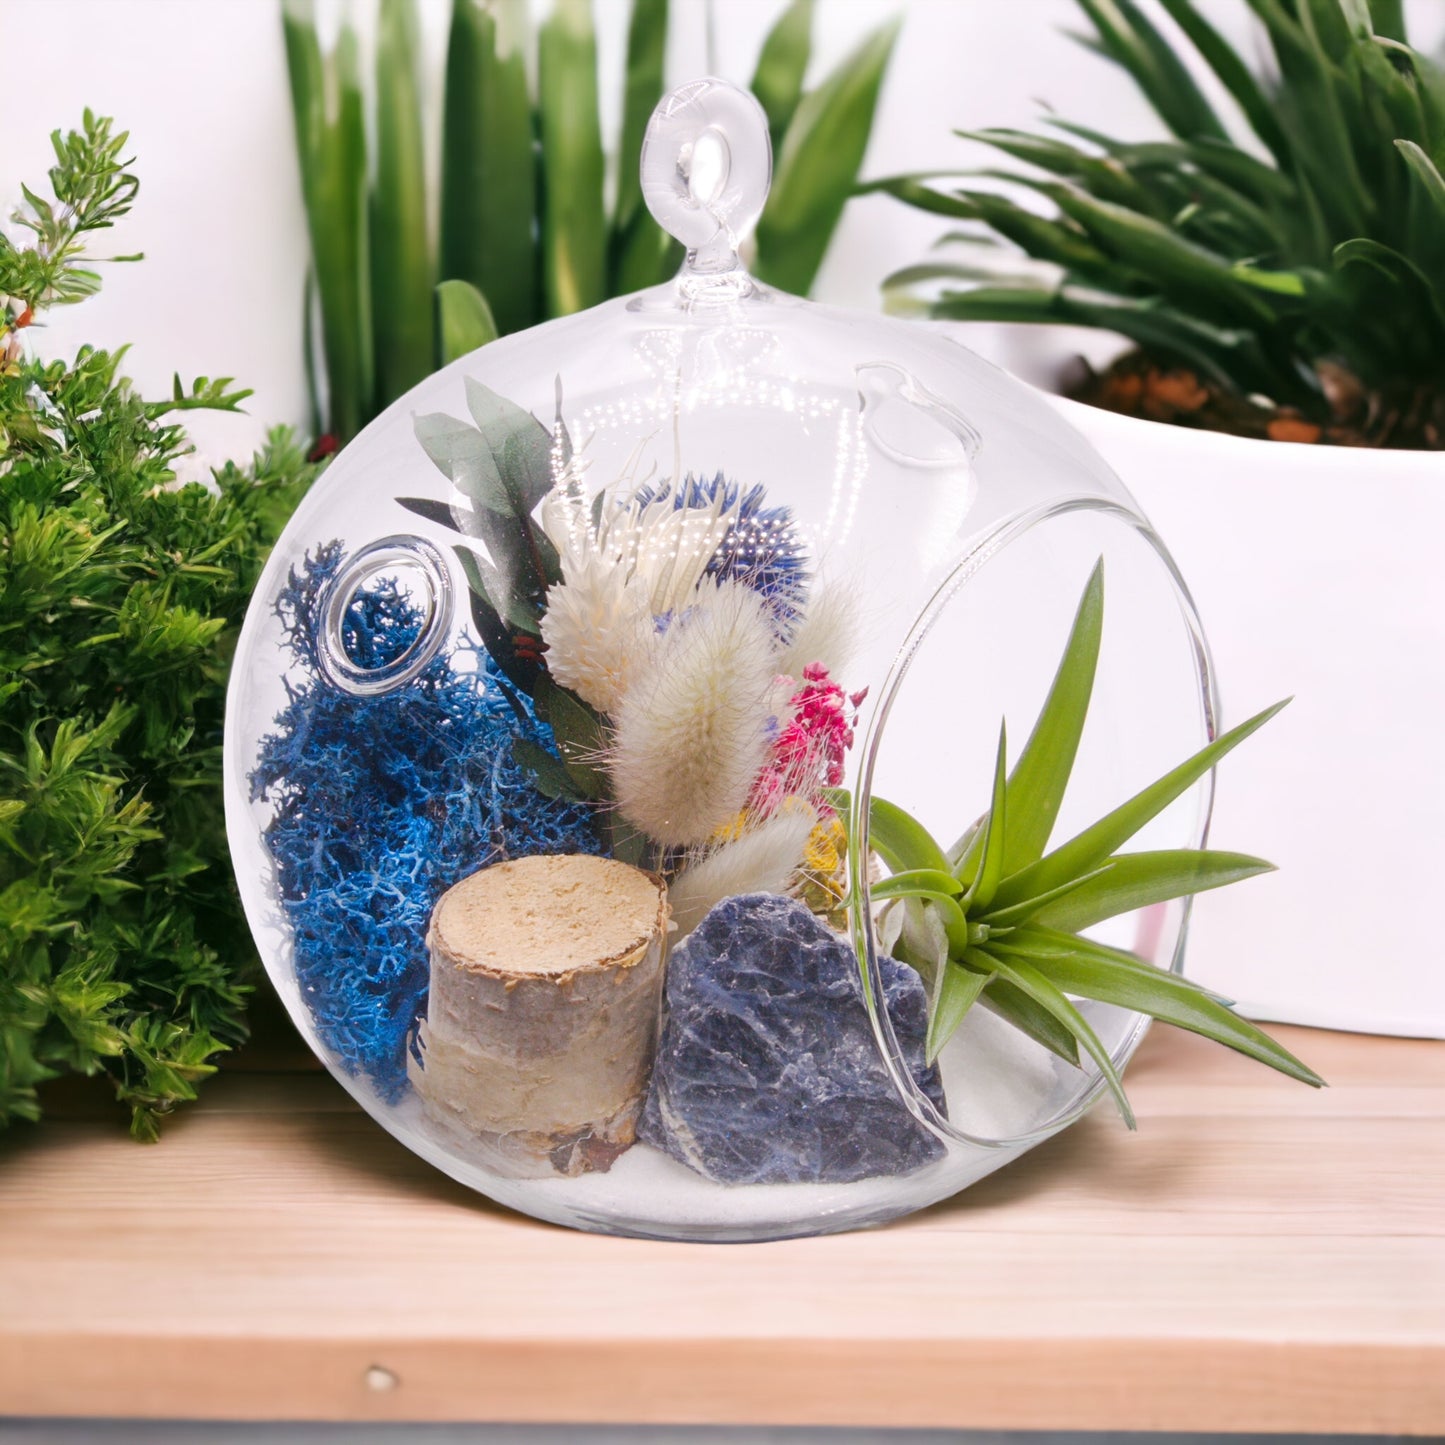 Glass bubble terrarium with sand, dried flowers, wood, moss, sodalite stone, and an airplant